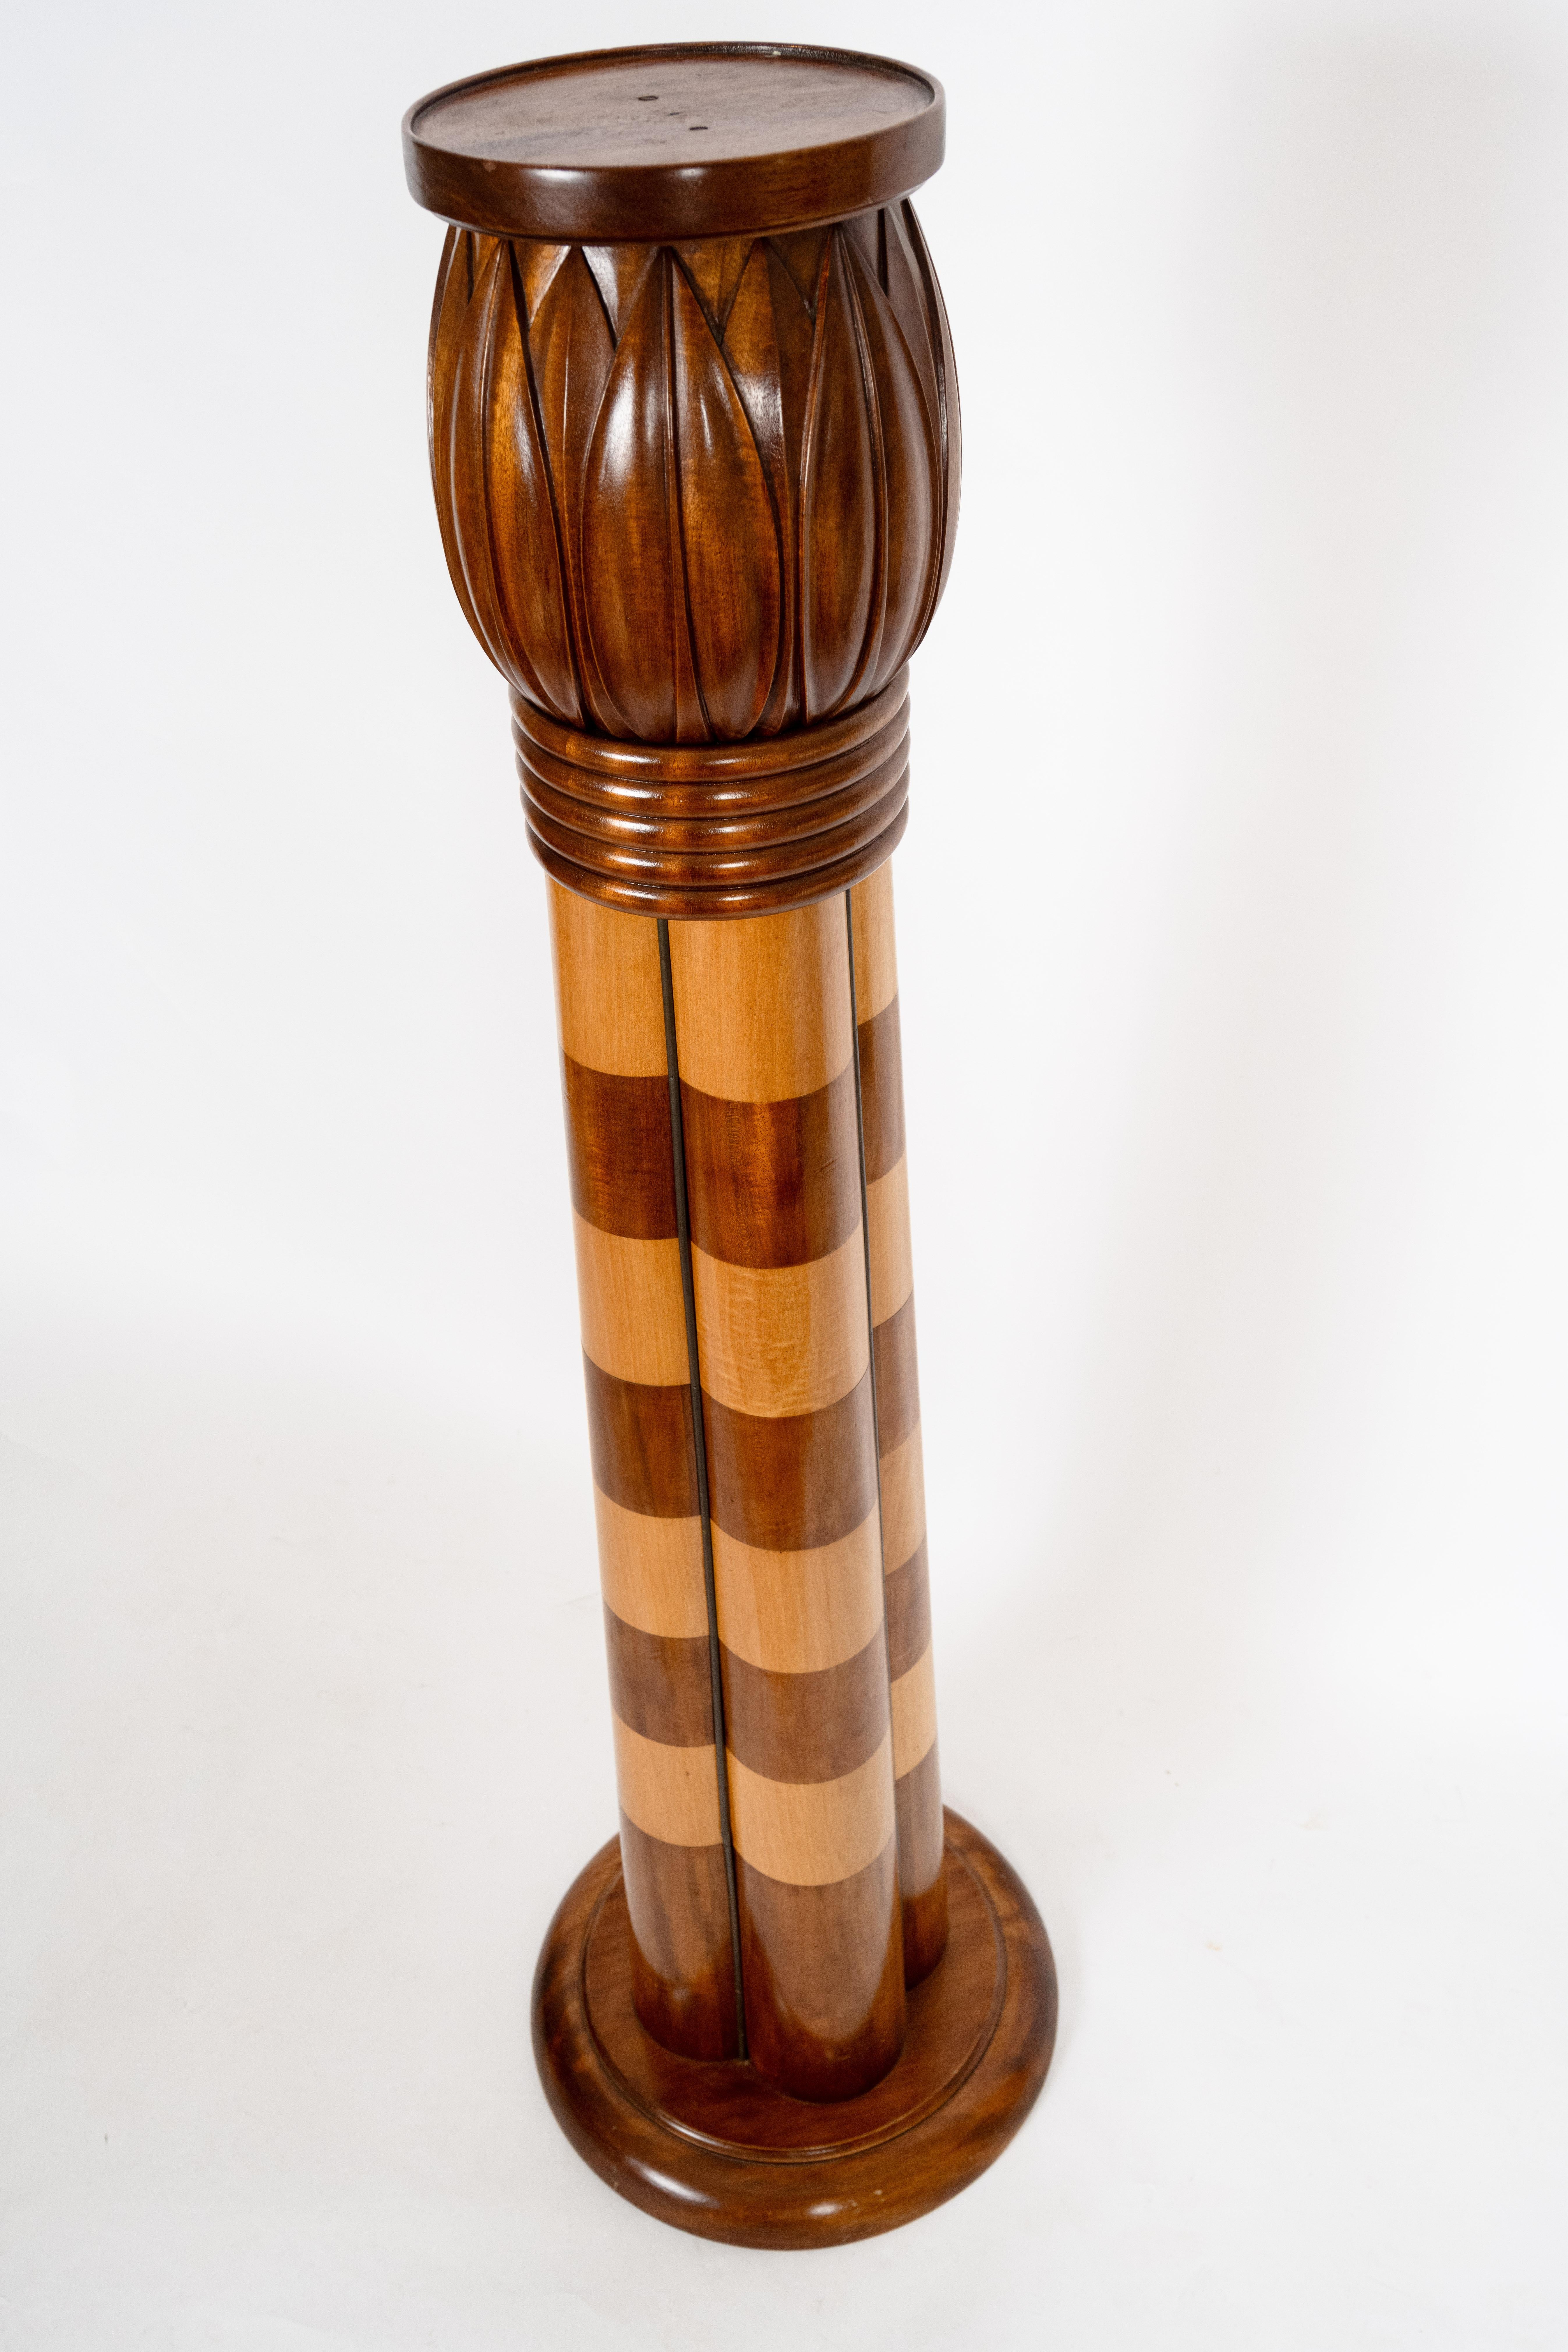 A cluster column form pedestal. The tapered base supported by a round plinth and having a stylized lotus flower carved element at the top. The base in contrasting light and medium colored satin wood  in walnut. Circa 1900